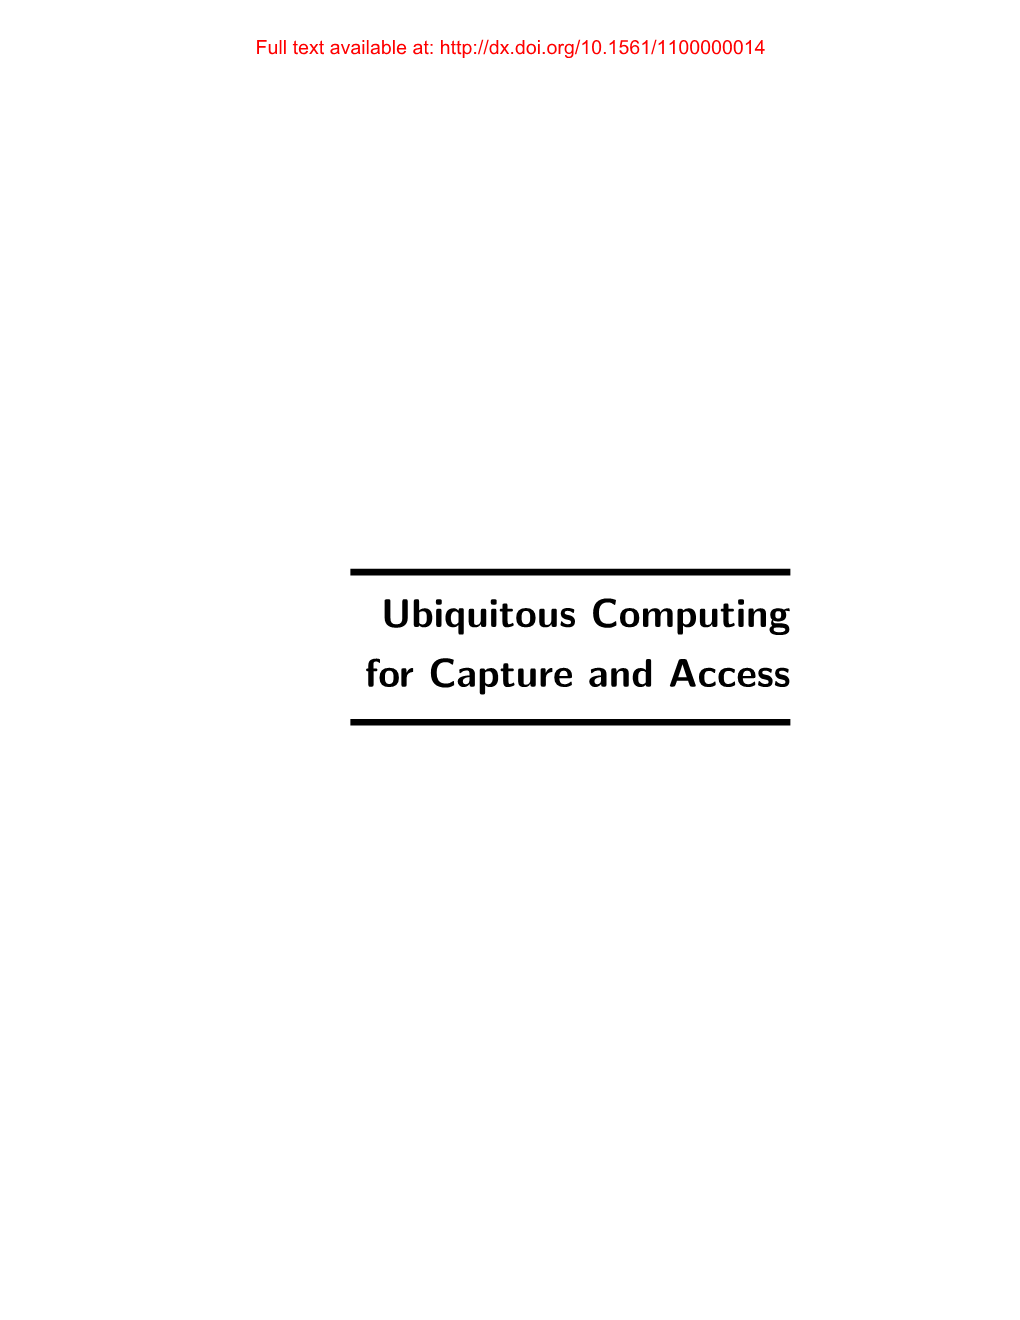 Ubiquitous Computing for Capture and Access Full Text Available At